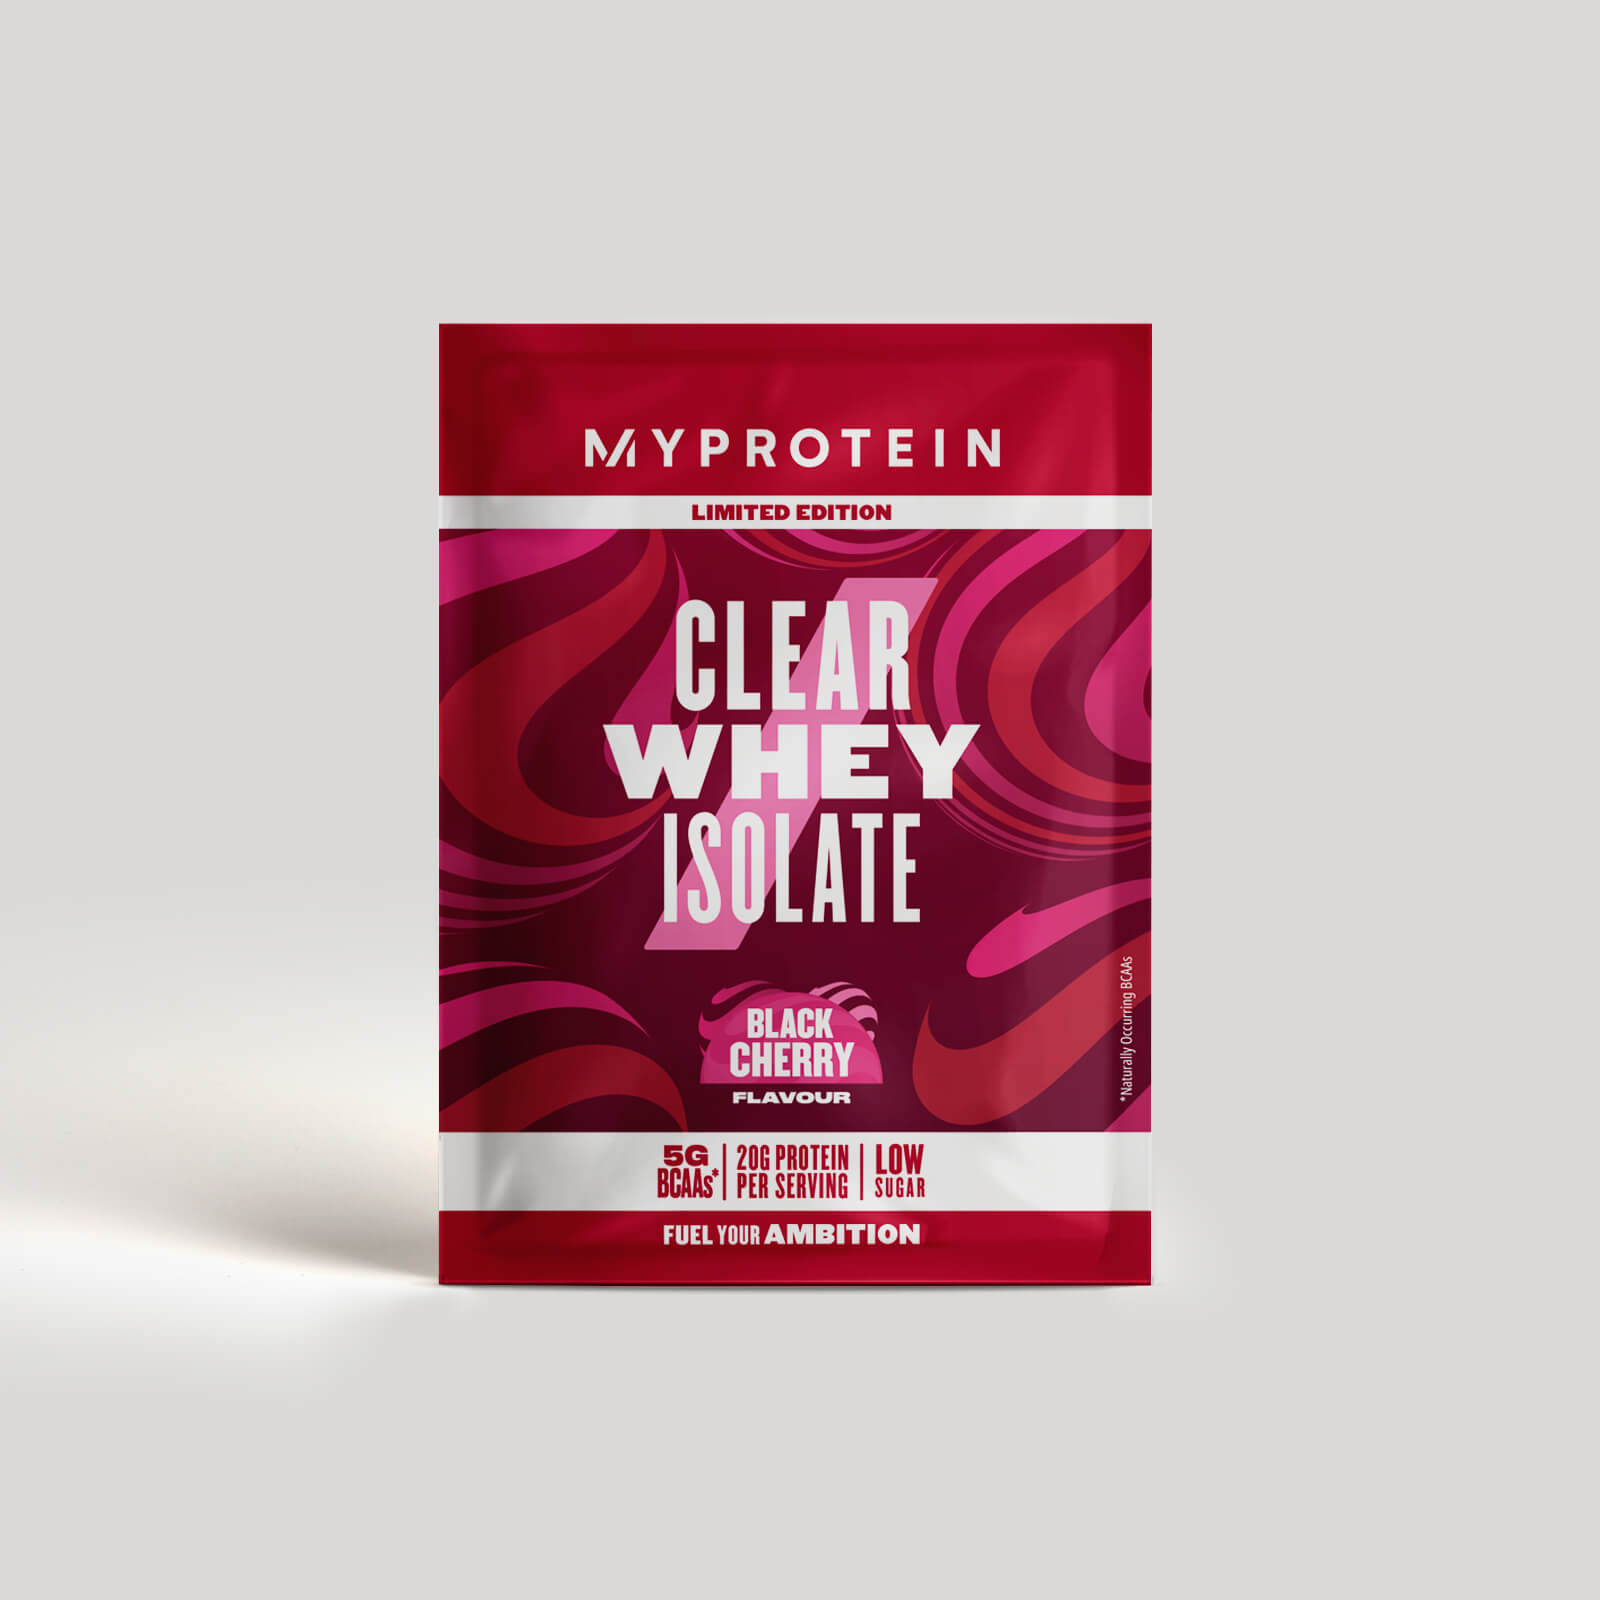 Myprotein Clear Whey Isolate, Impact Week (Sample) (ALT) (DONOTUSE)